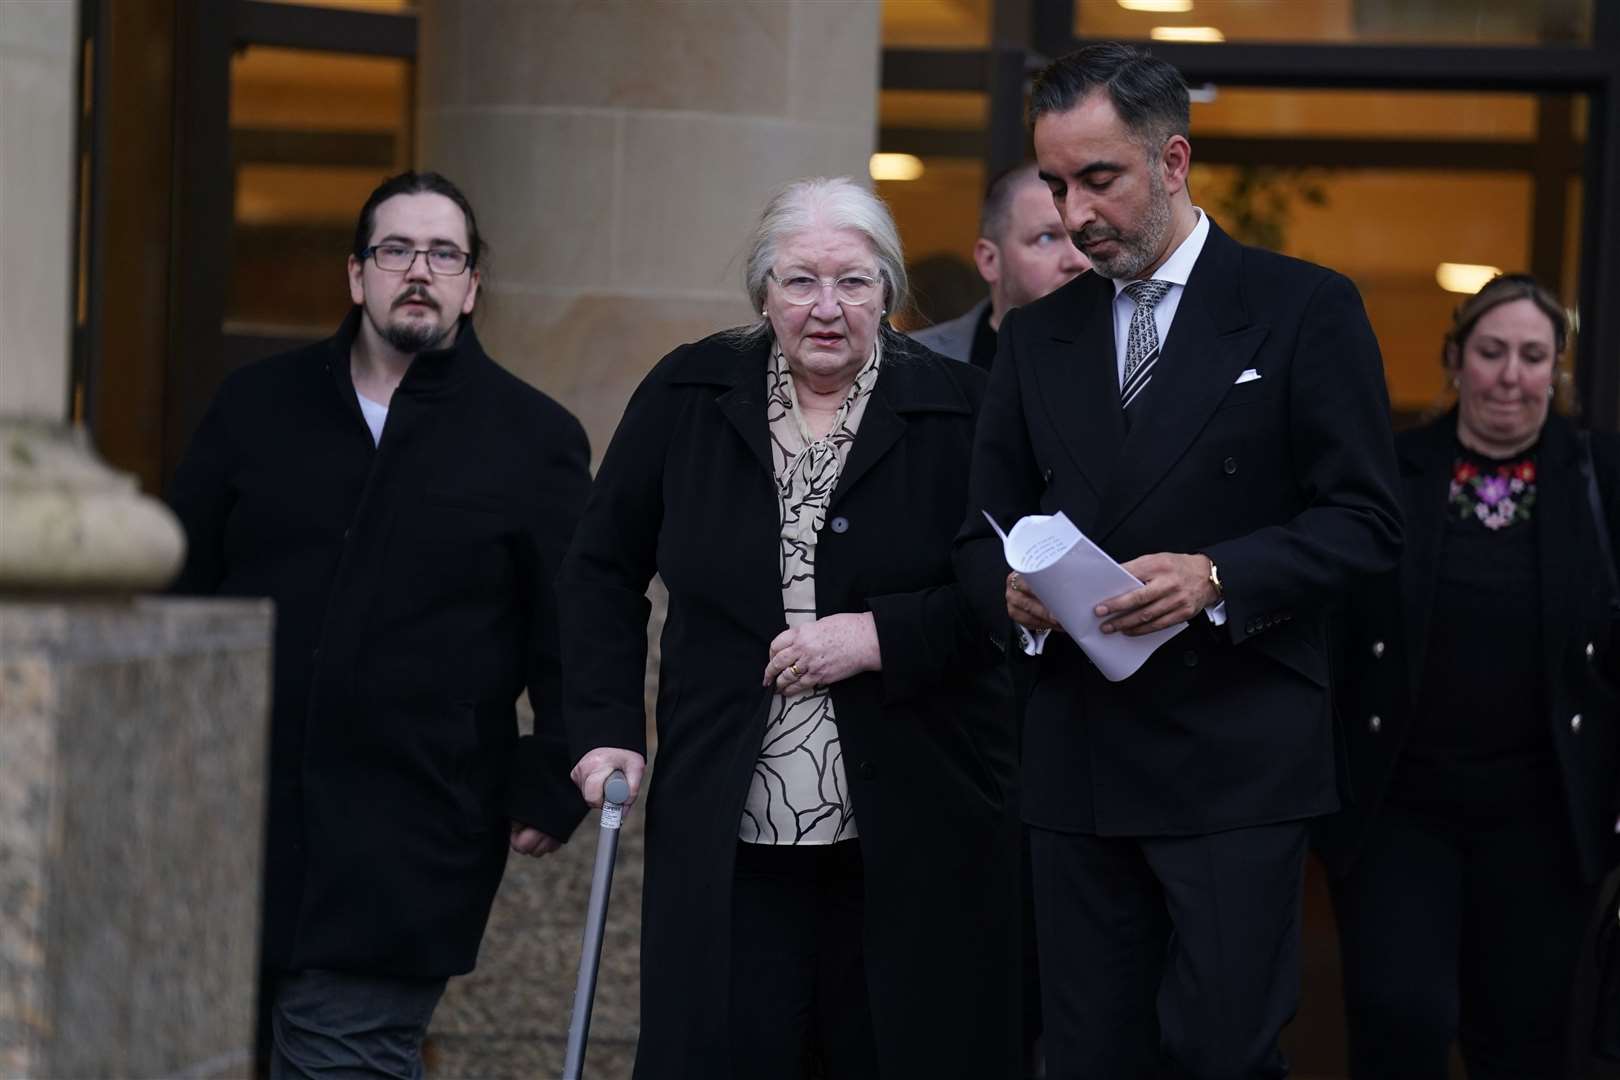 Margaret Caldwell, mother of Emma Caldwell, following the sentencing on Wednesday (Andrew Milligan/PA)